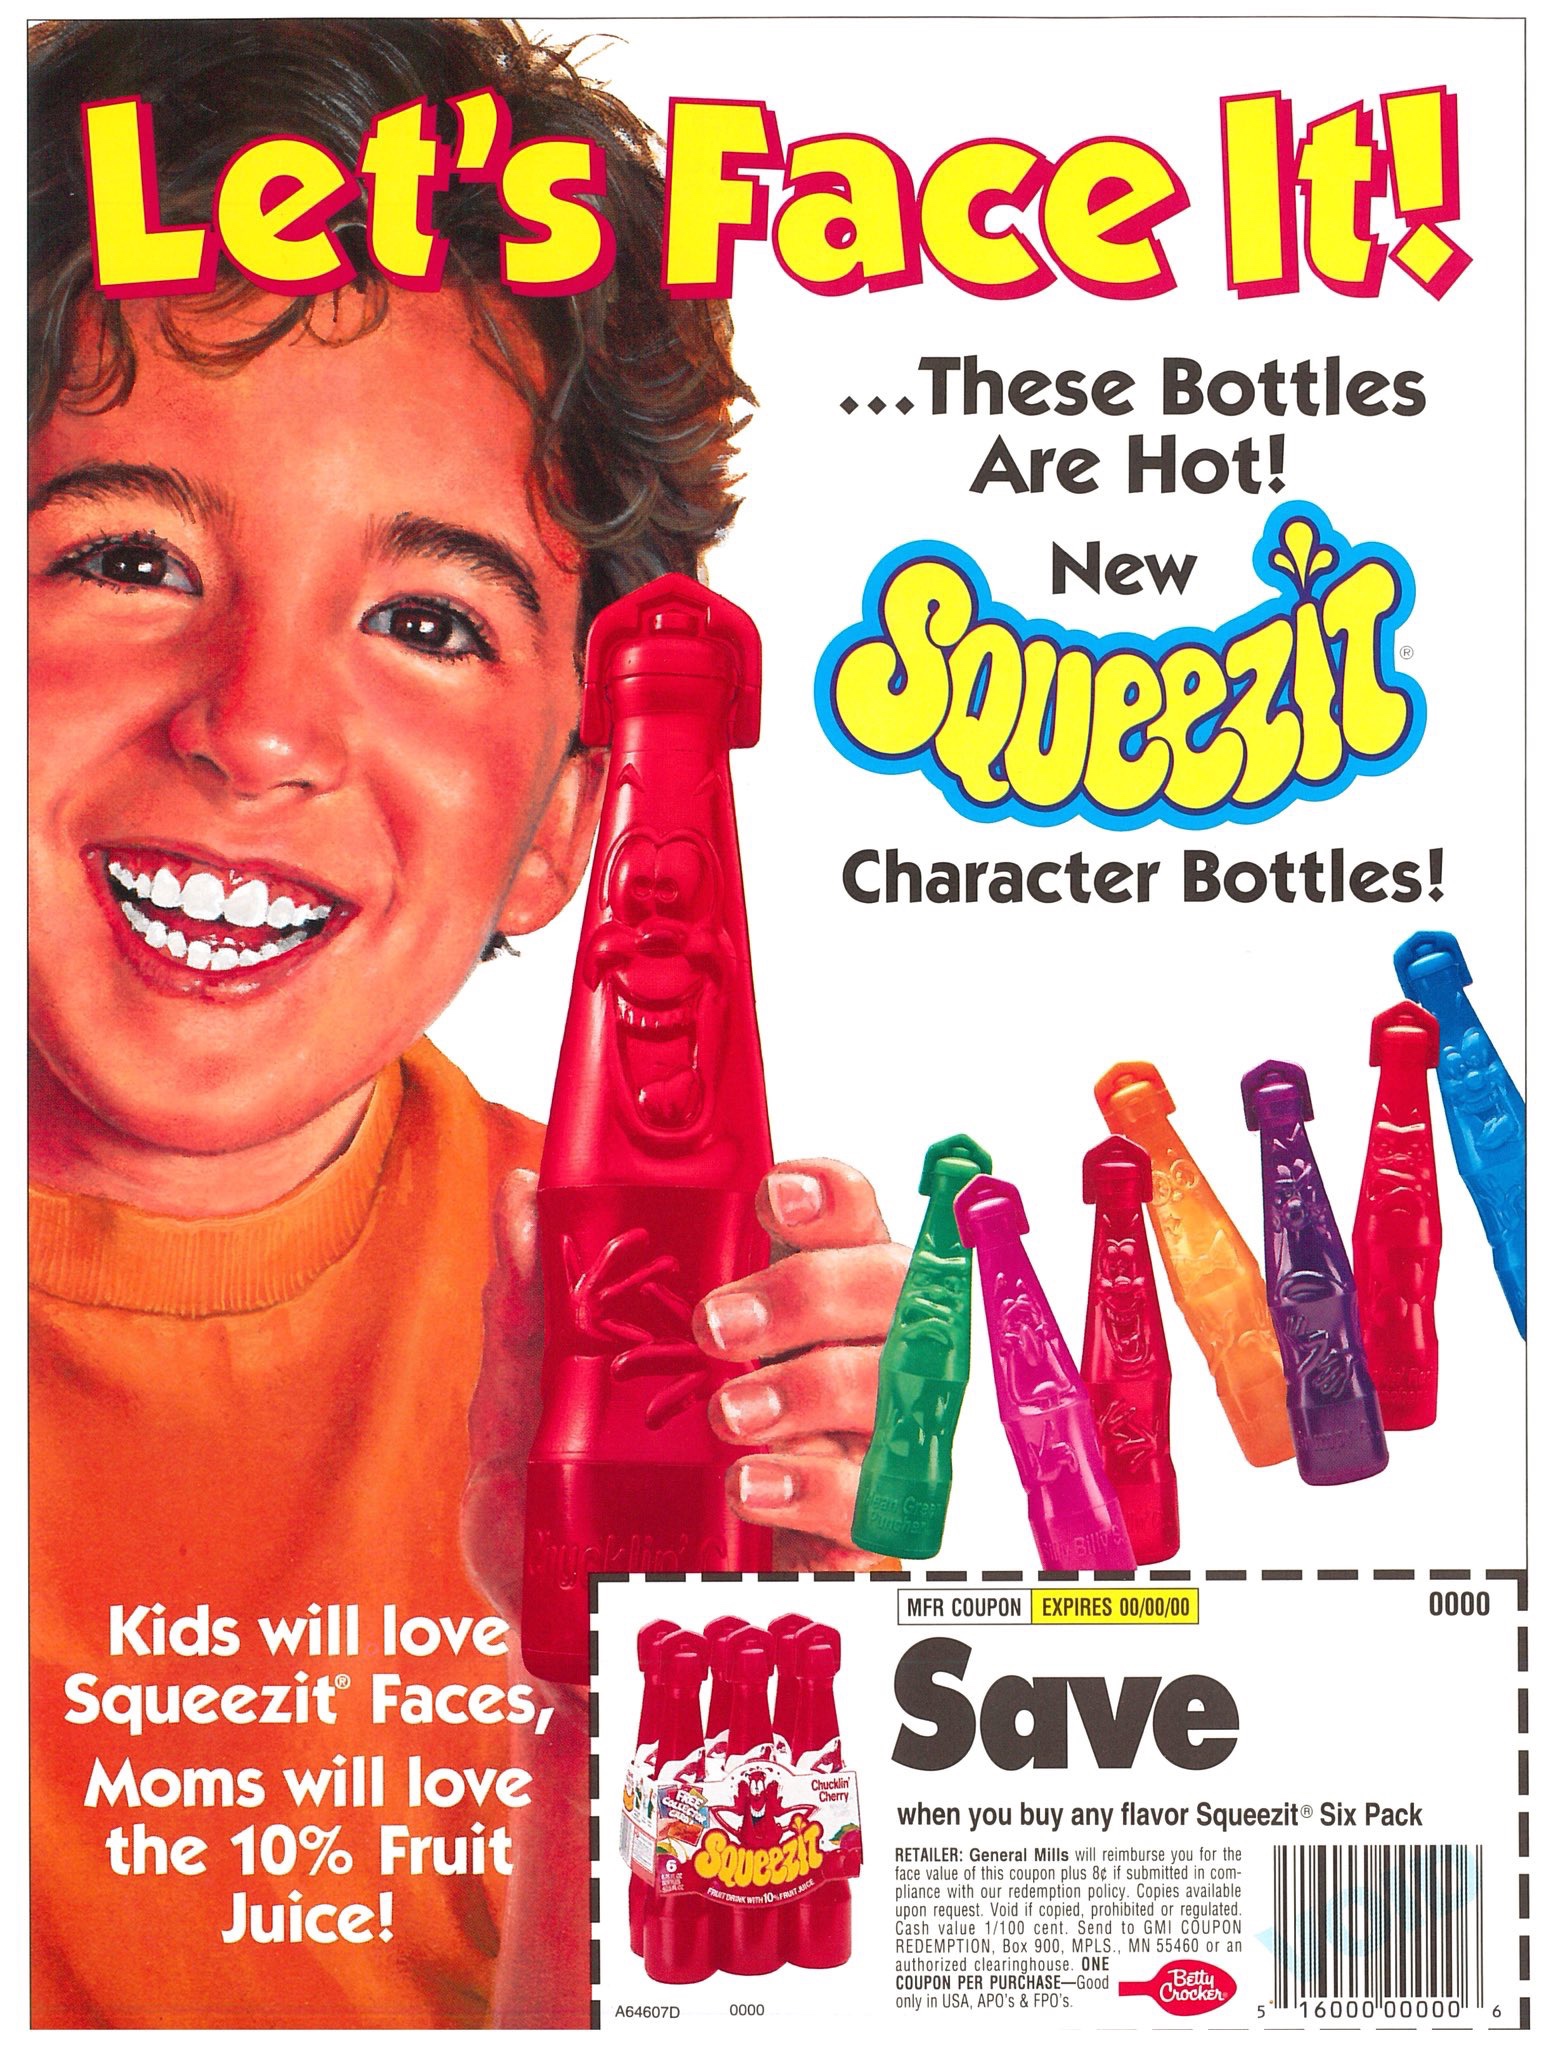 squeezit drinks - Let's Face It! ... These Bottles Are Hot! New Squez21 Character Bottles! Froup Erres Kids will love Squeezit Faces, Moms will love the 10% Fruit Juice! when you buy any favor Squeest St Pack